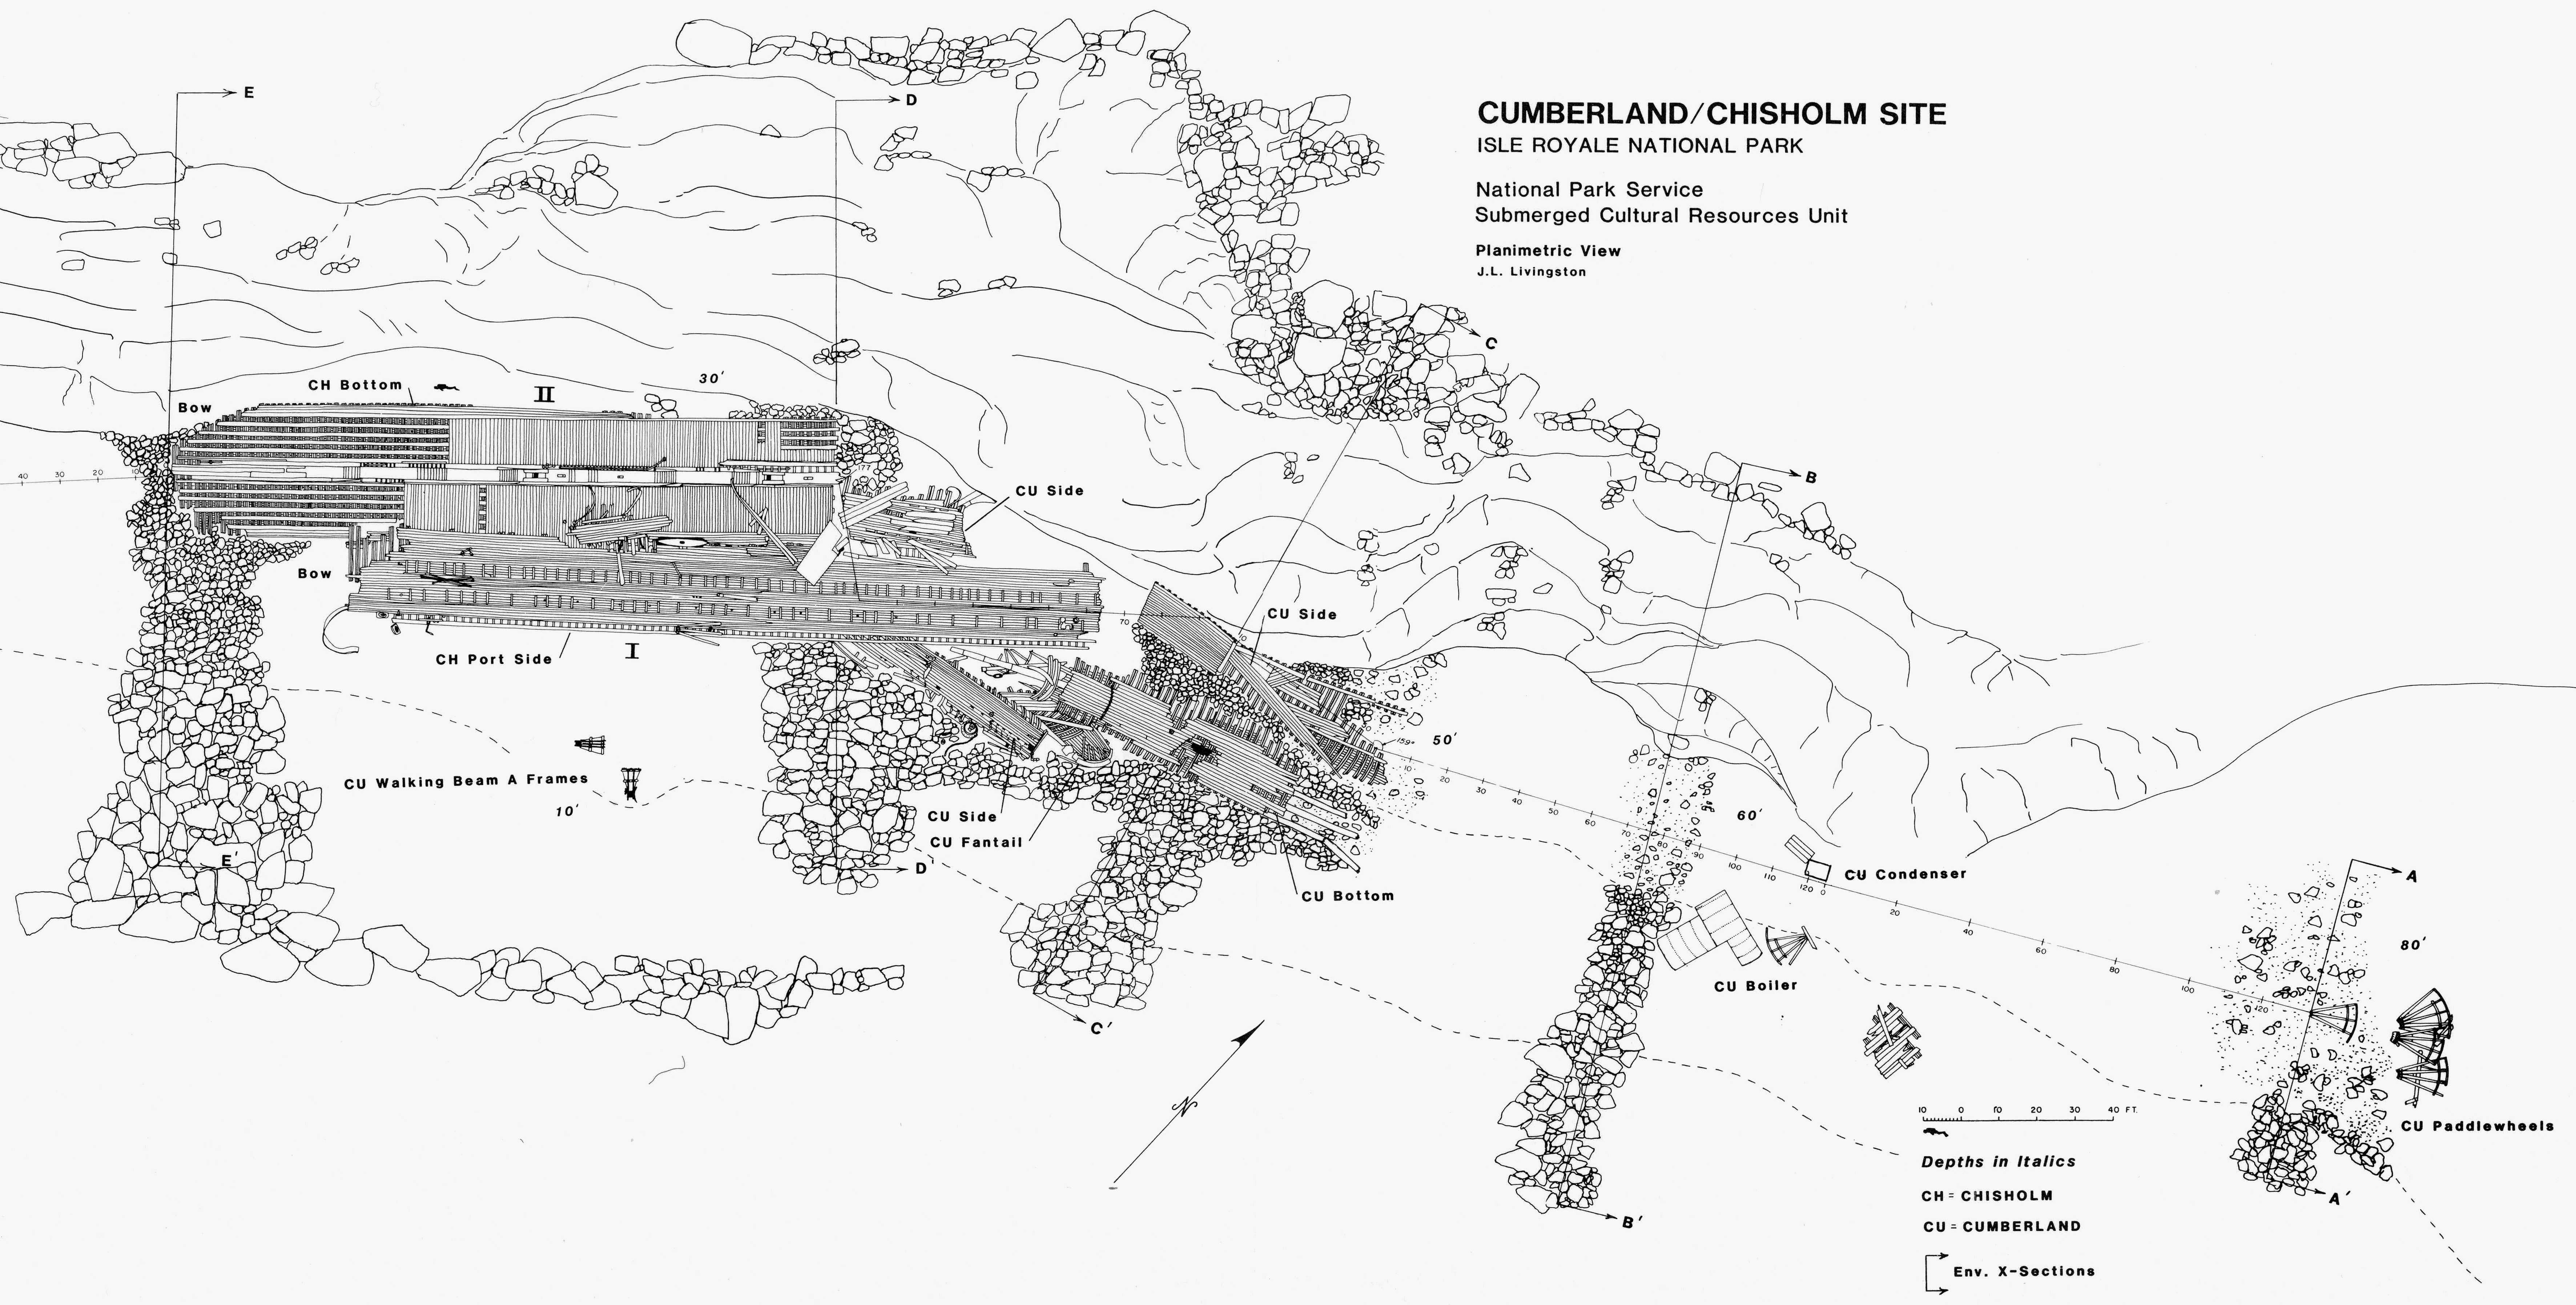 east side underwater artist sketch of the Cumberland and Chisholm shipwreck site